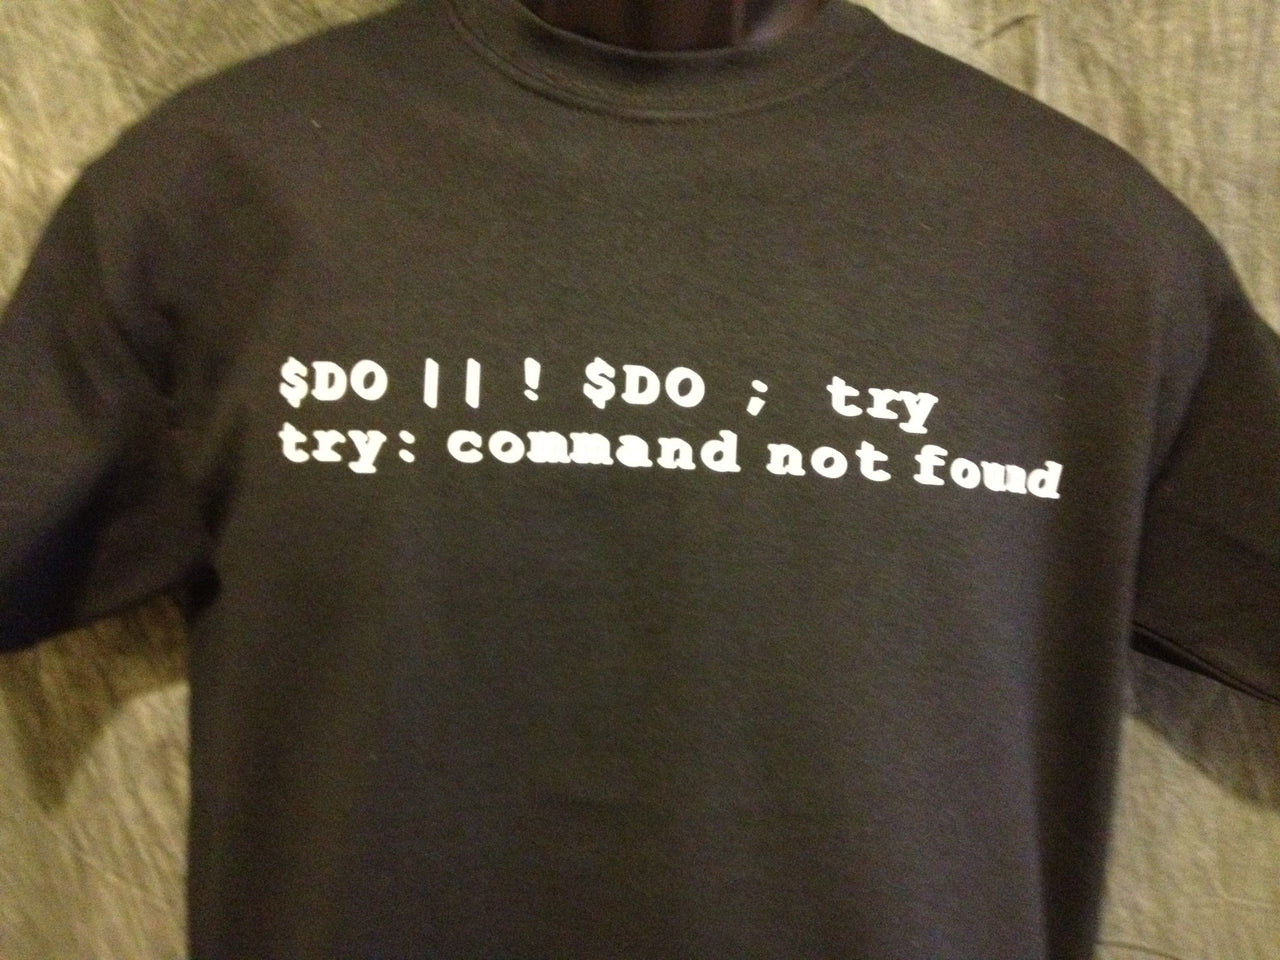 Do or Do Not; There is no Try (Computer Code Yoda Expression of Speech) Tshirt: Black With White Print - TshirtNow.net - 8